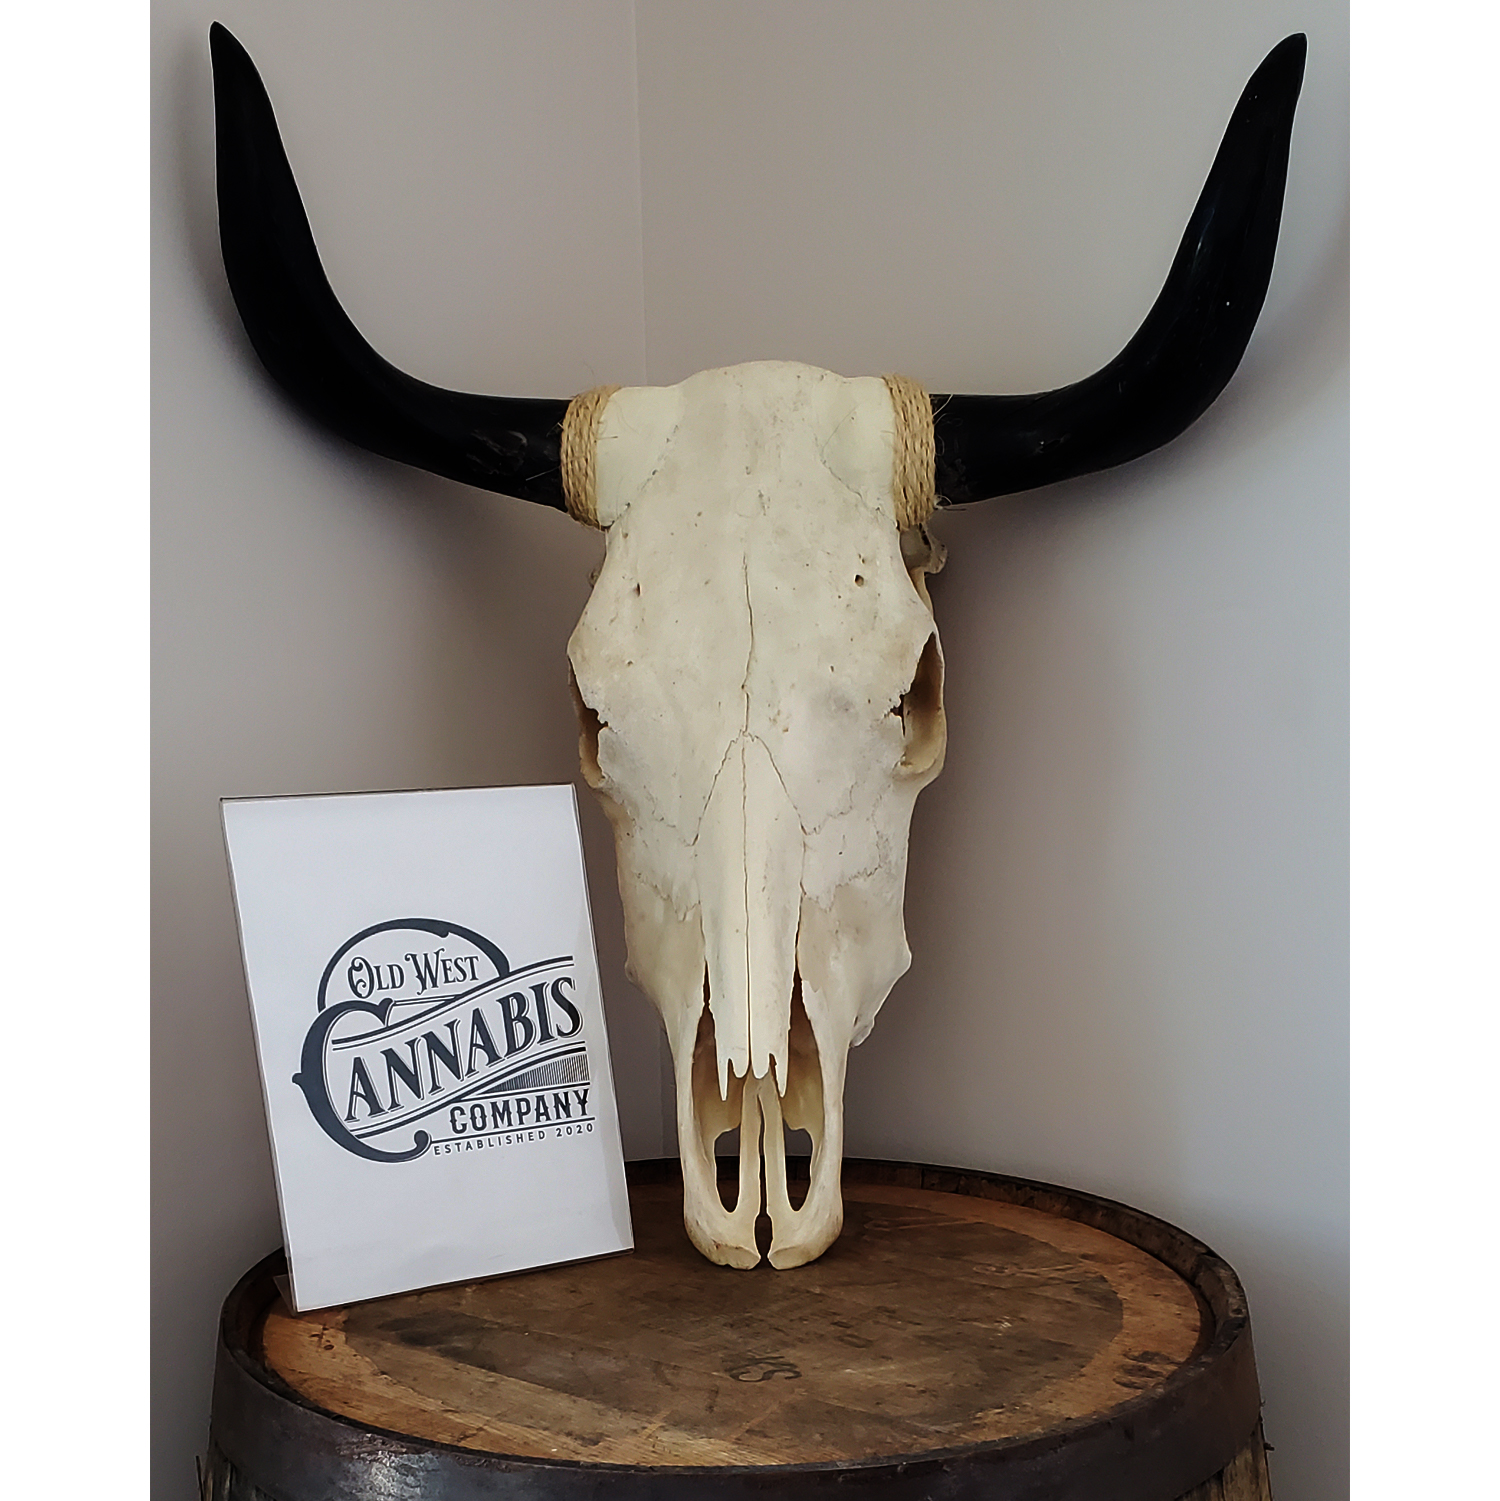 A cattle skull resting atop a wooden barrel. Decor in the shop.